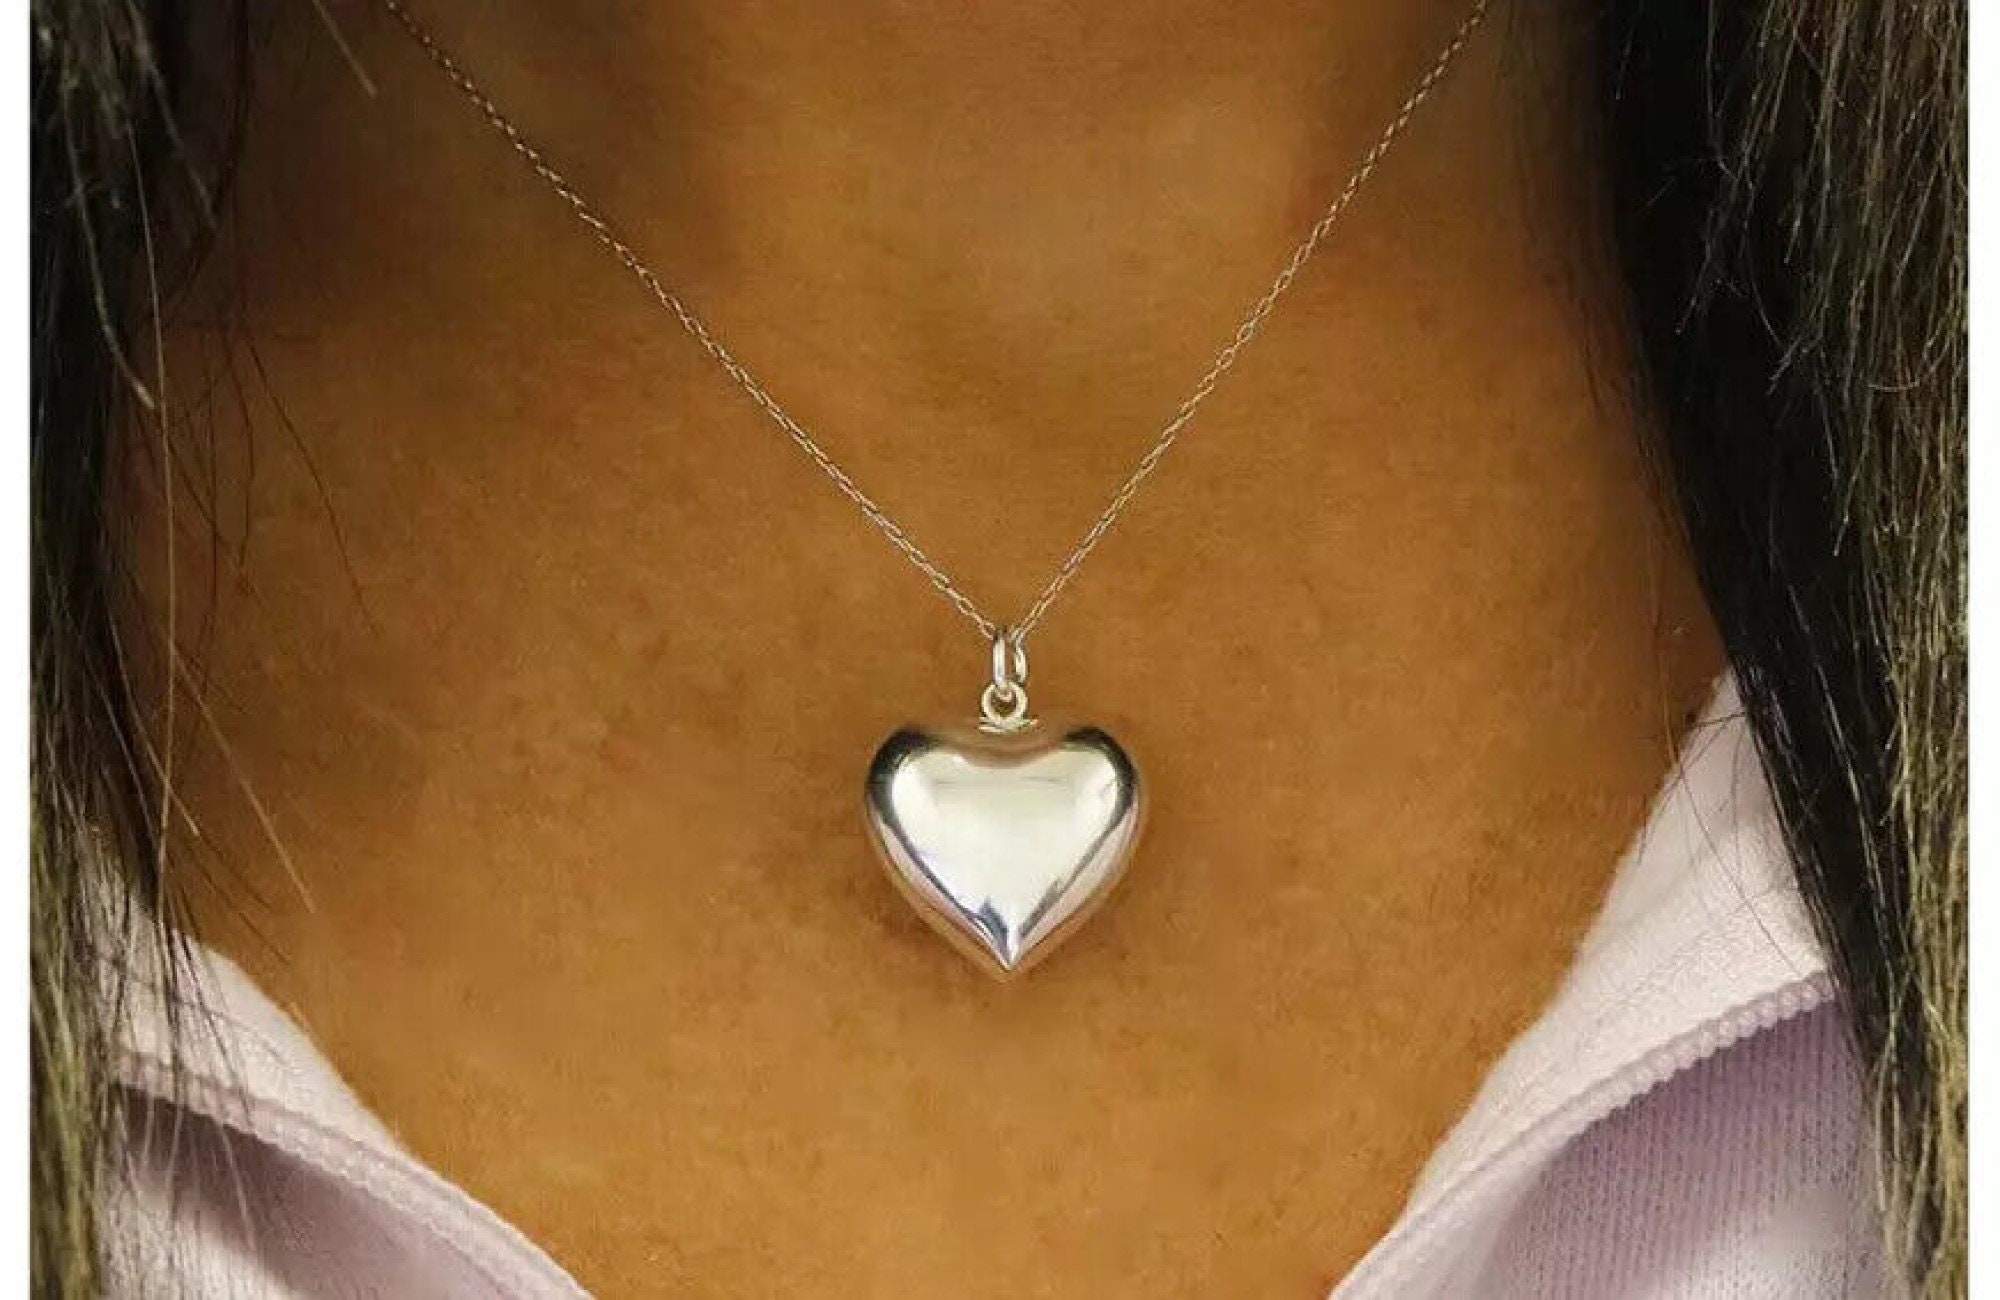 Sterling Silver Flat Heart Chain 4x5mm Italy Unfinished Bulk 20 Feet